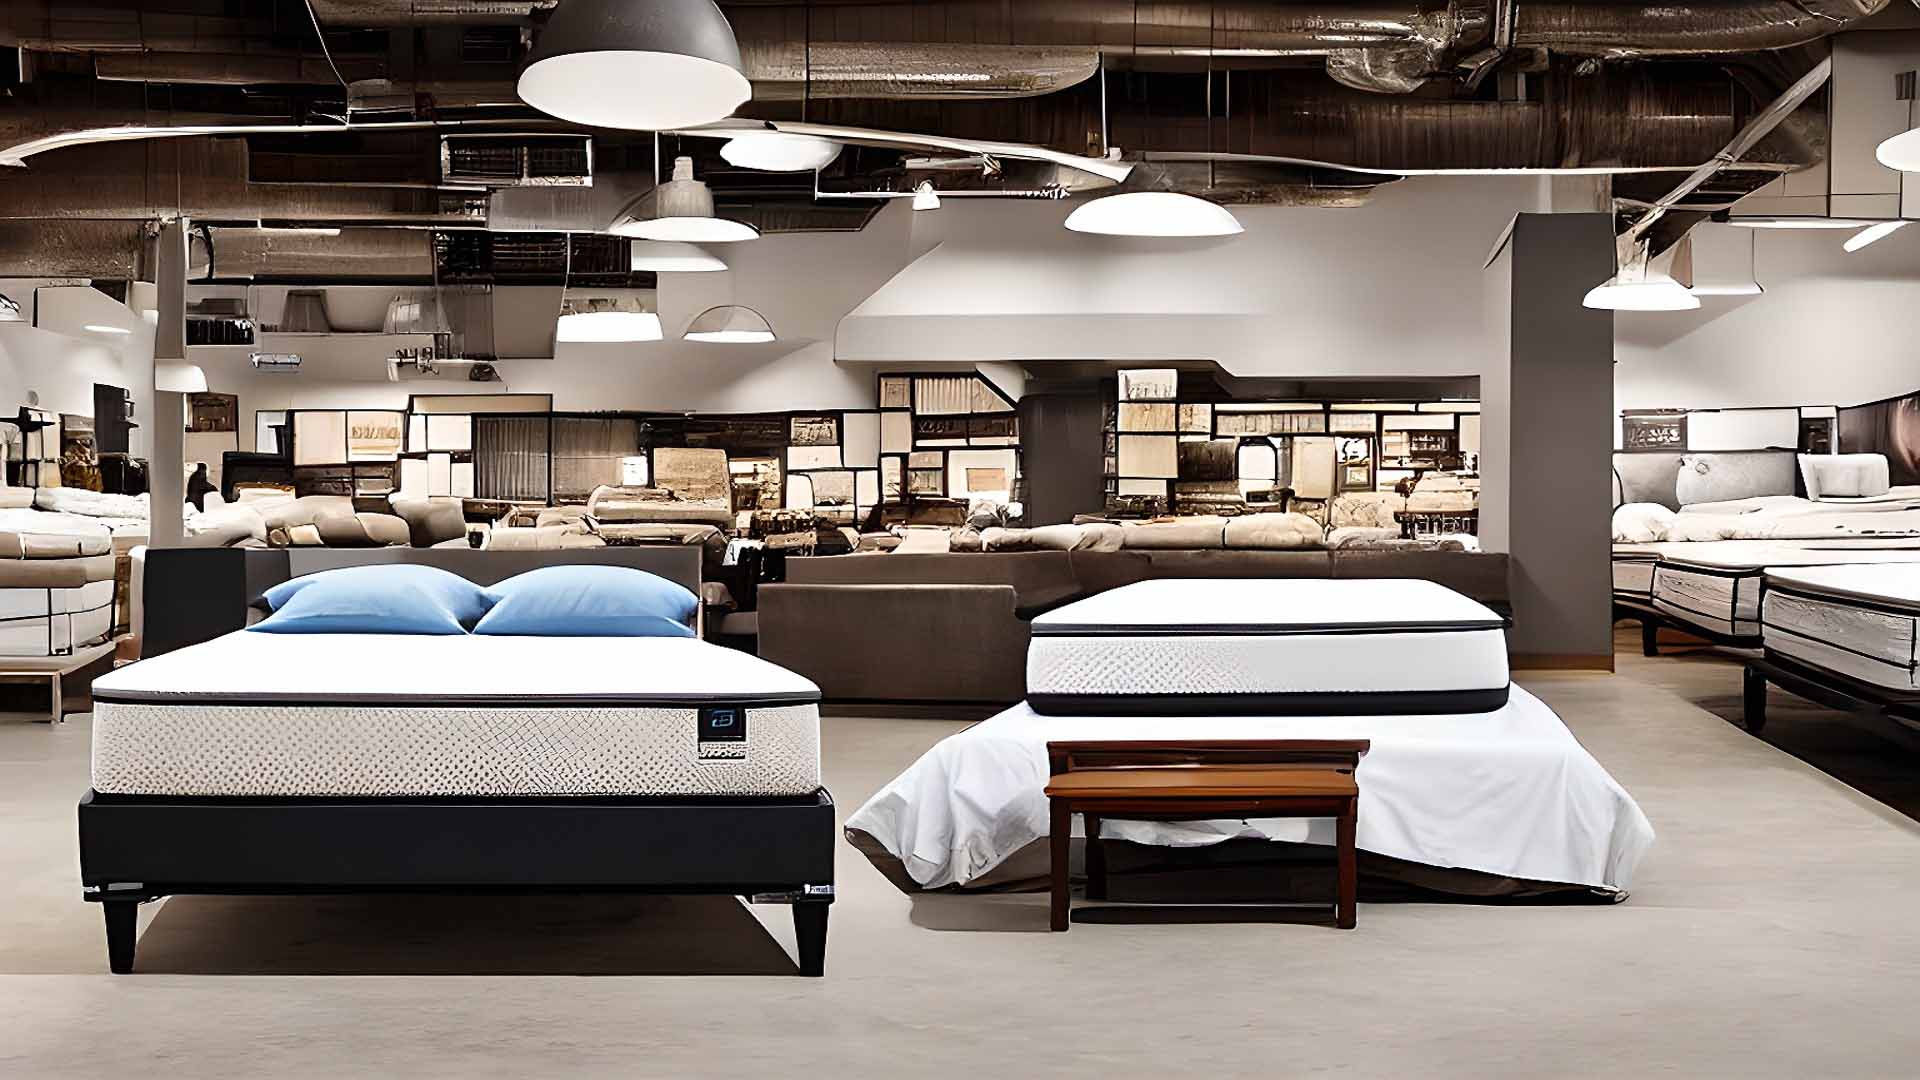 Mattress Outlet Showroom With Queen Beds Orem, UT